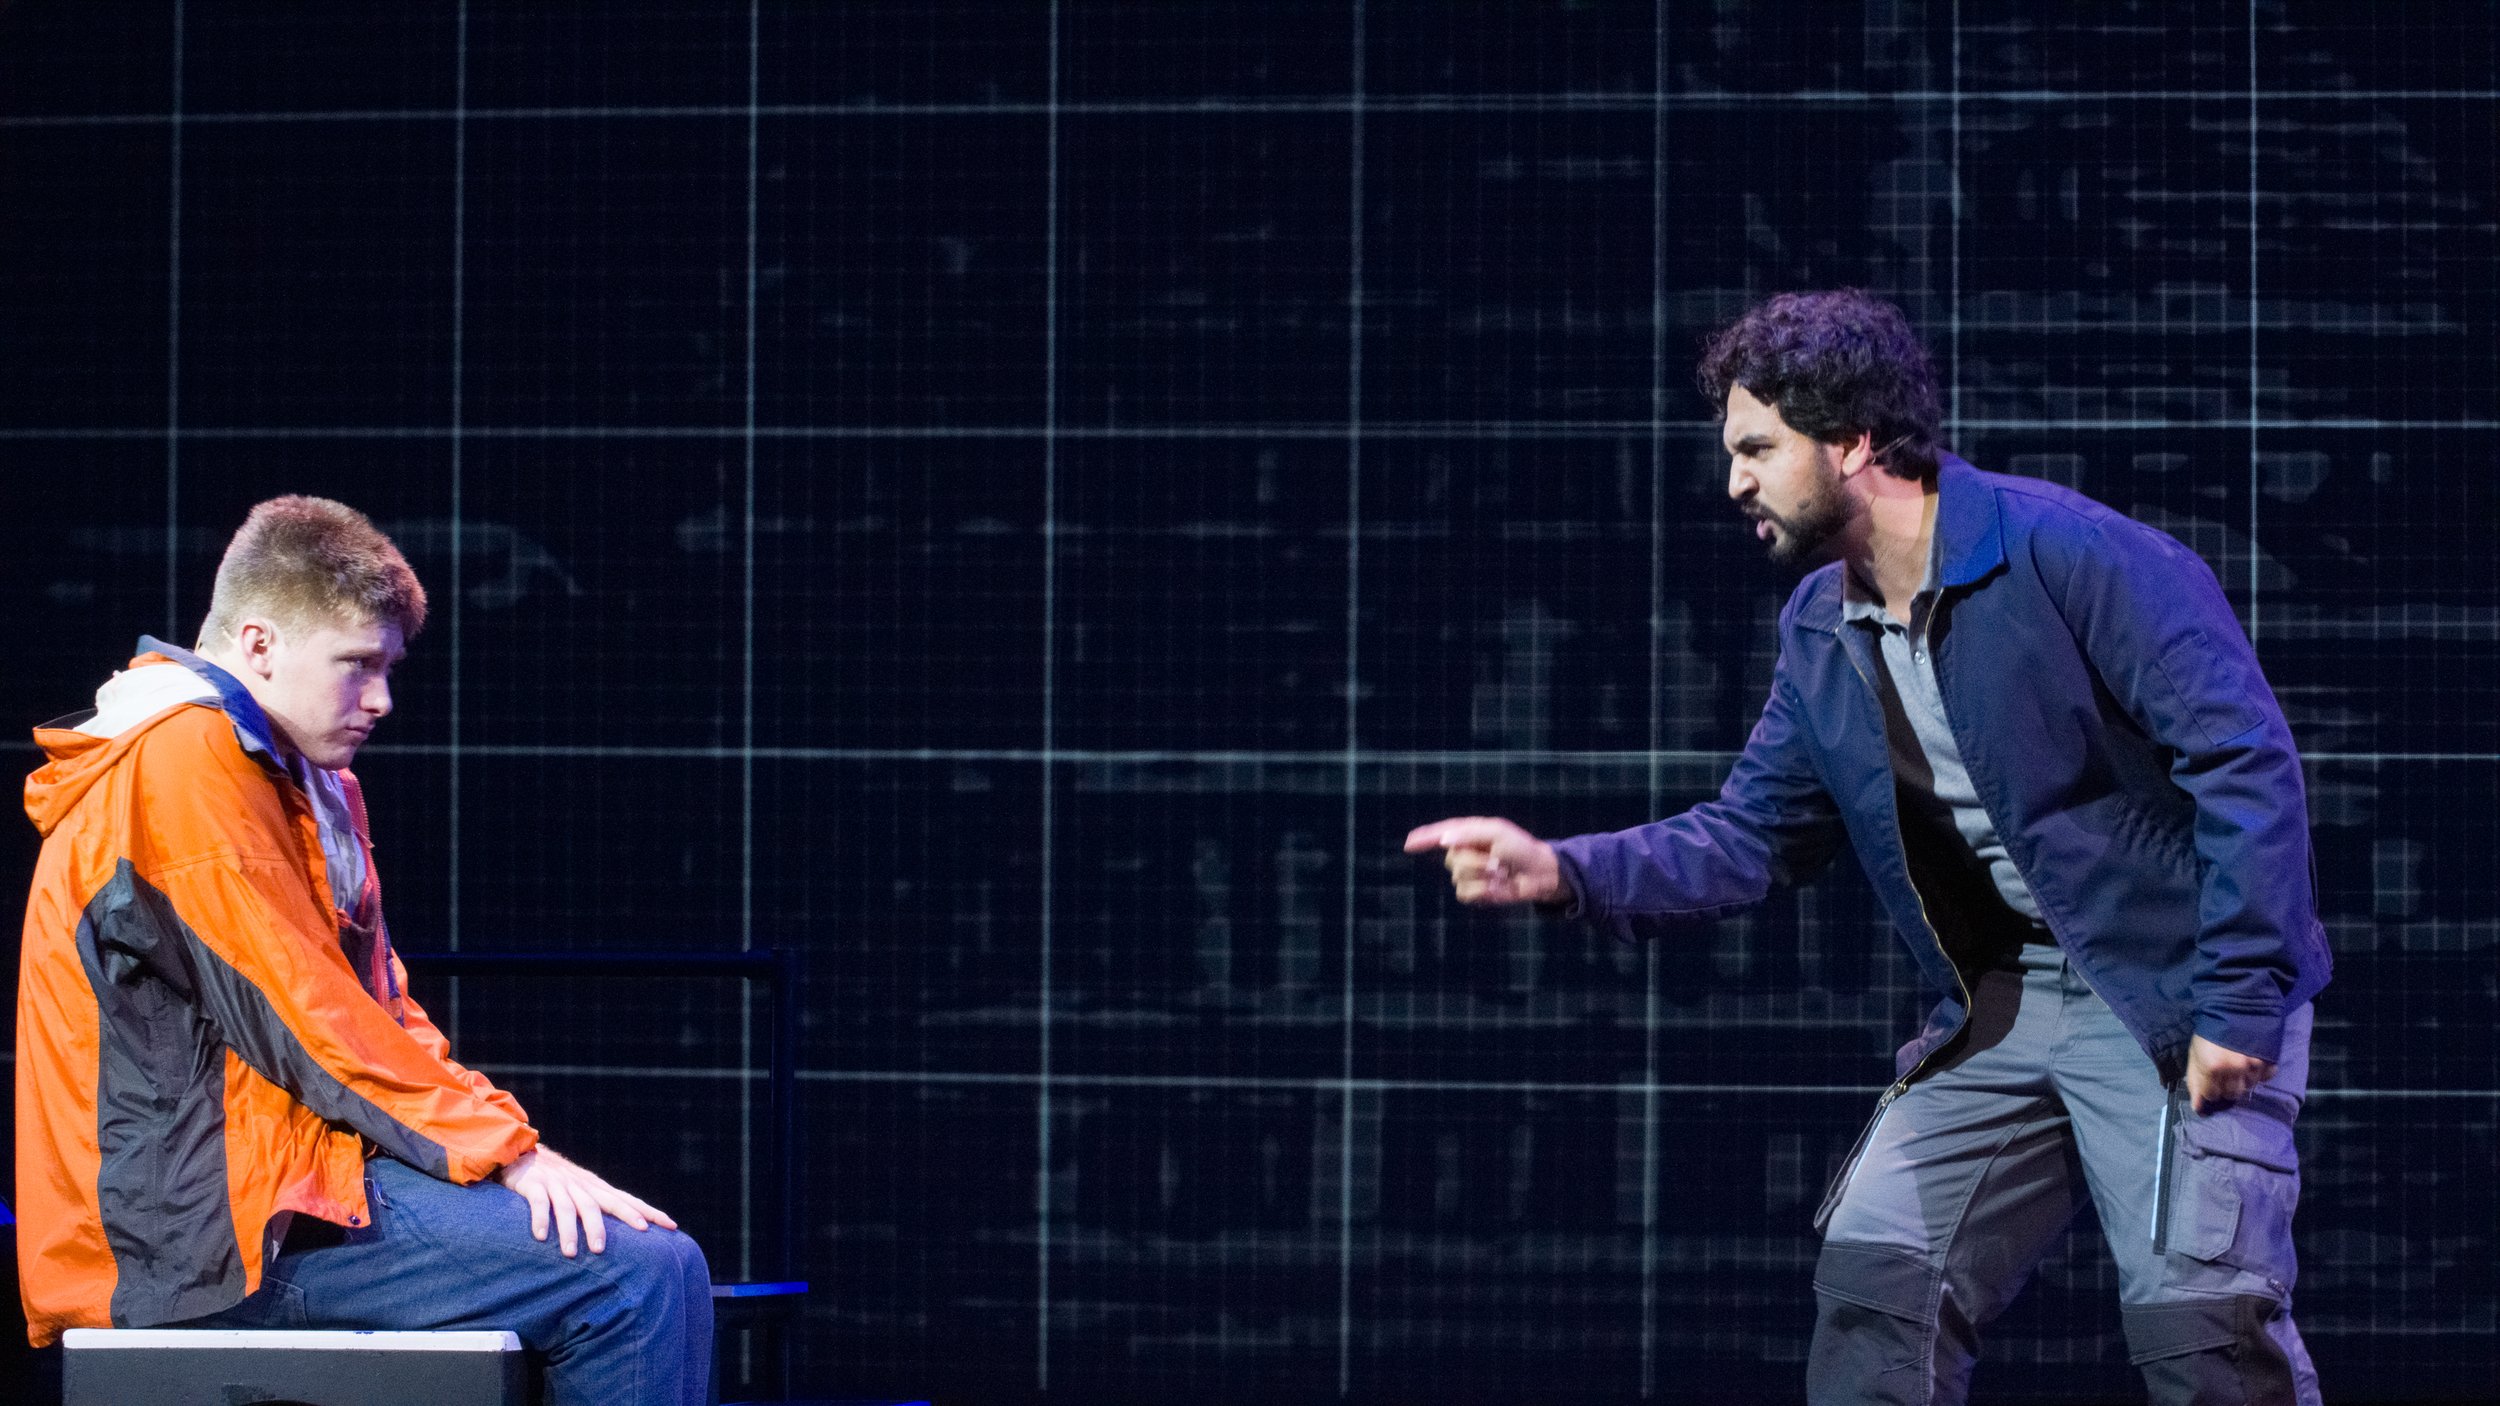  Justin Valine (left) and Tommy Abraham (right) during last dress rehearsal before the first showing of "The Curious Incident of The Dog in The Night-Time" on Thursday, October 7th at Santa Monica College, Santa Monica, Calif. 